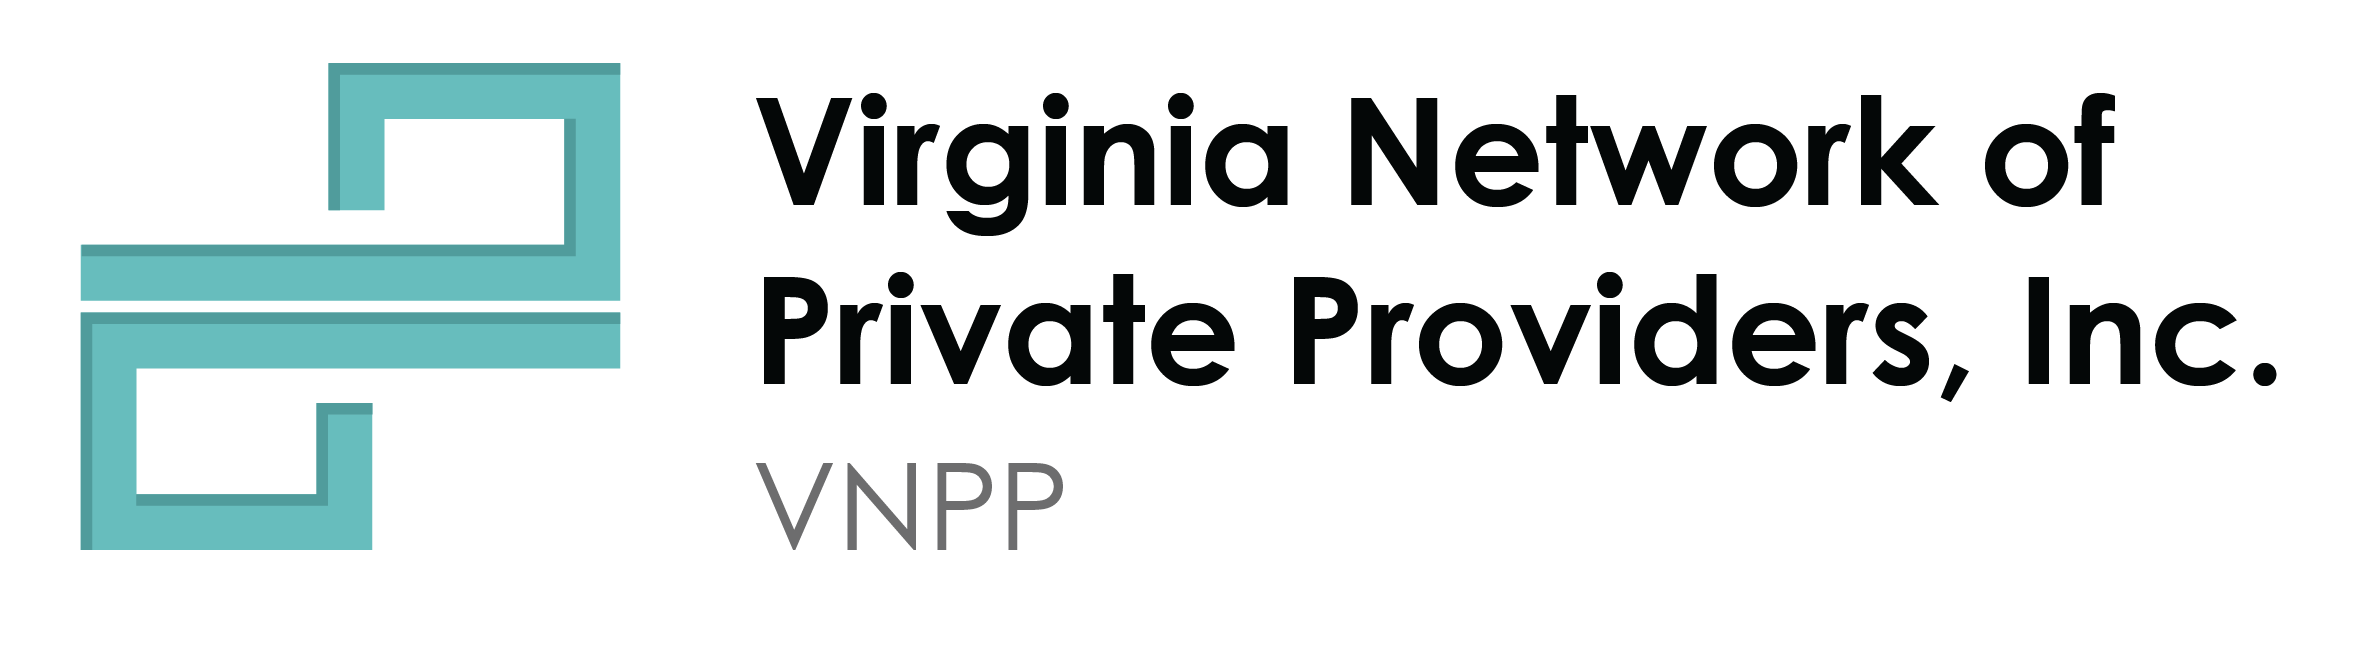 Virginia Network of Private Providers, a partner of Wall Residences.